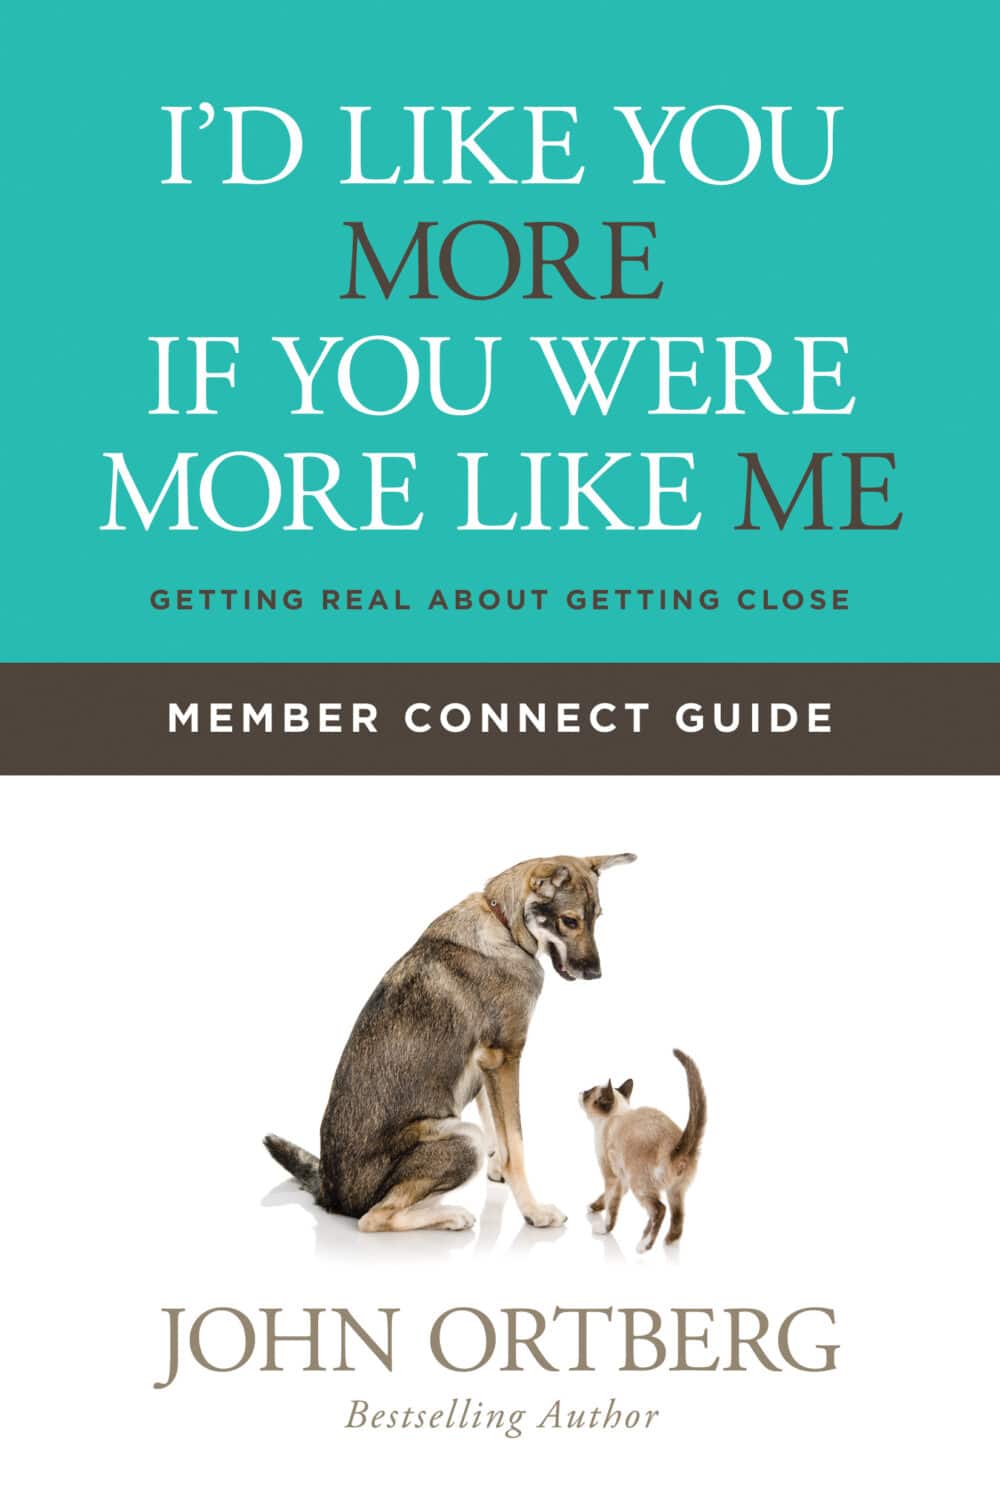 Member Connect Guide cover image